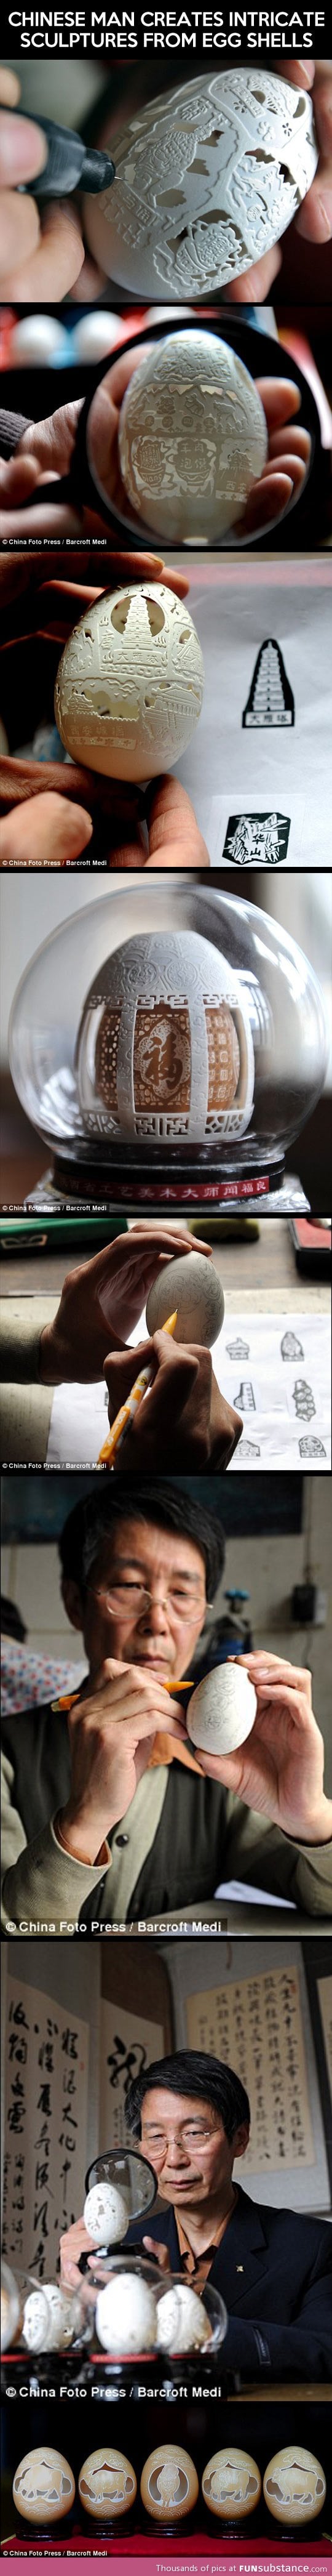 Intricate sculptures from egg shells